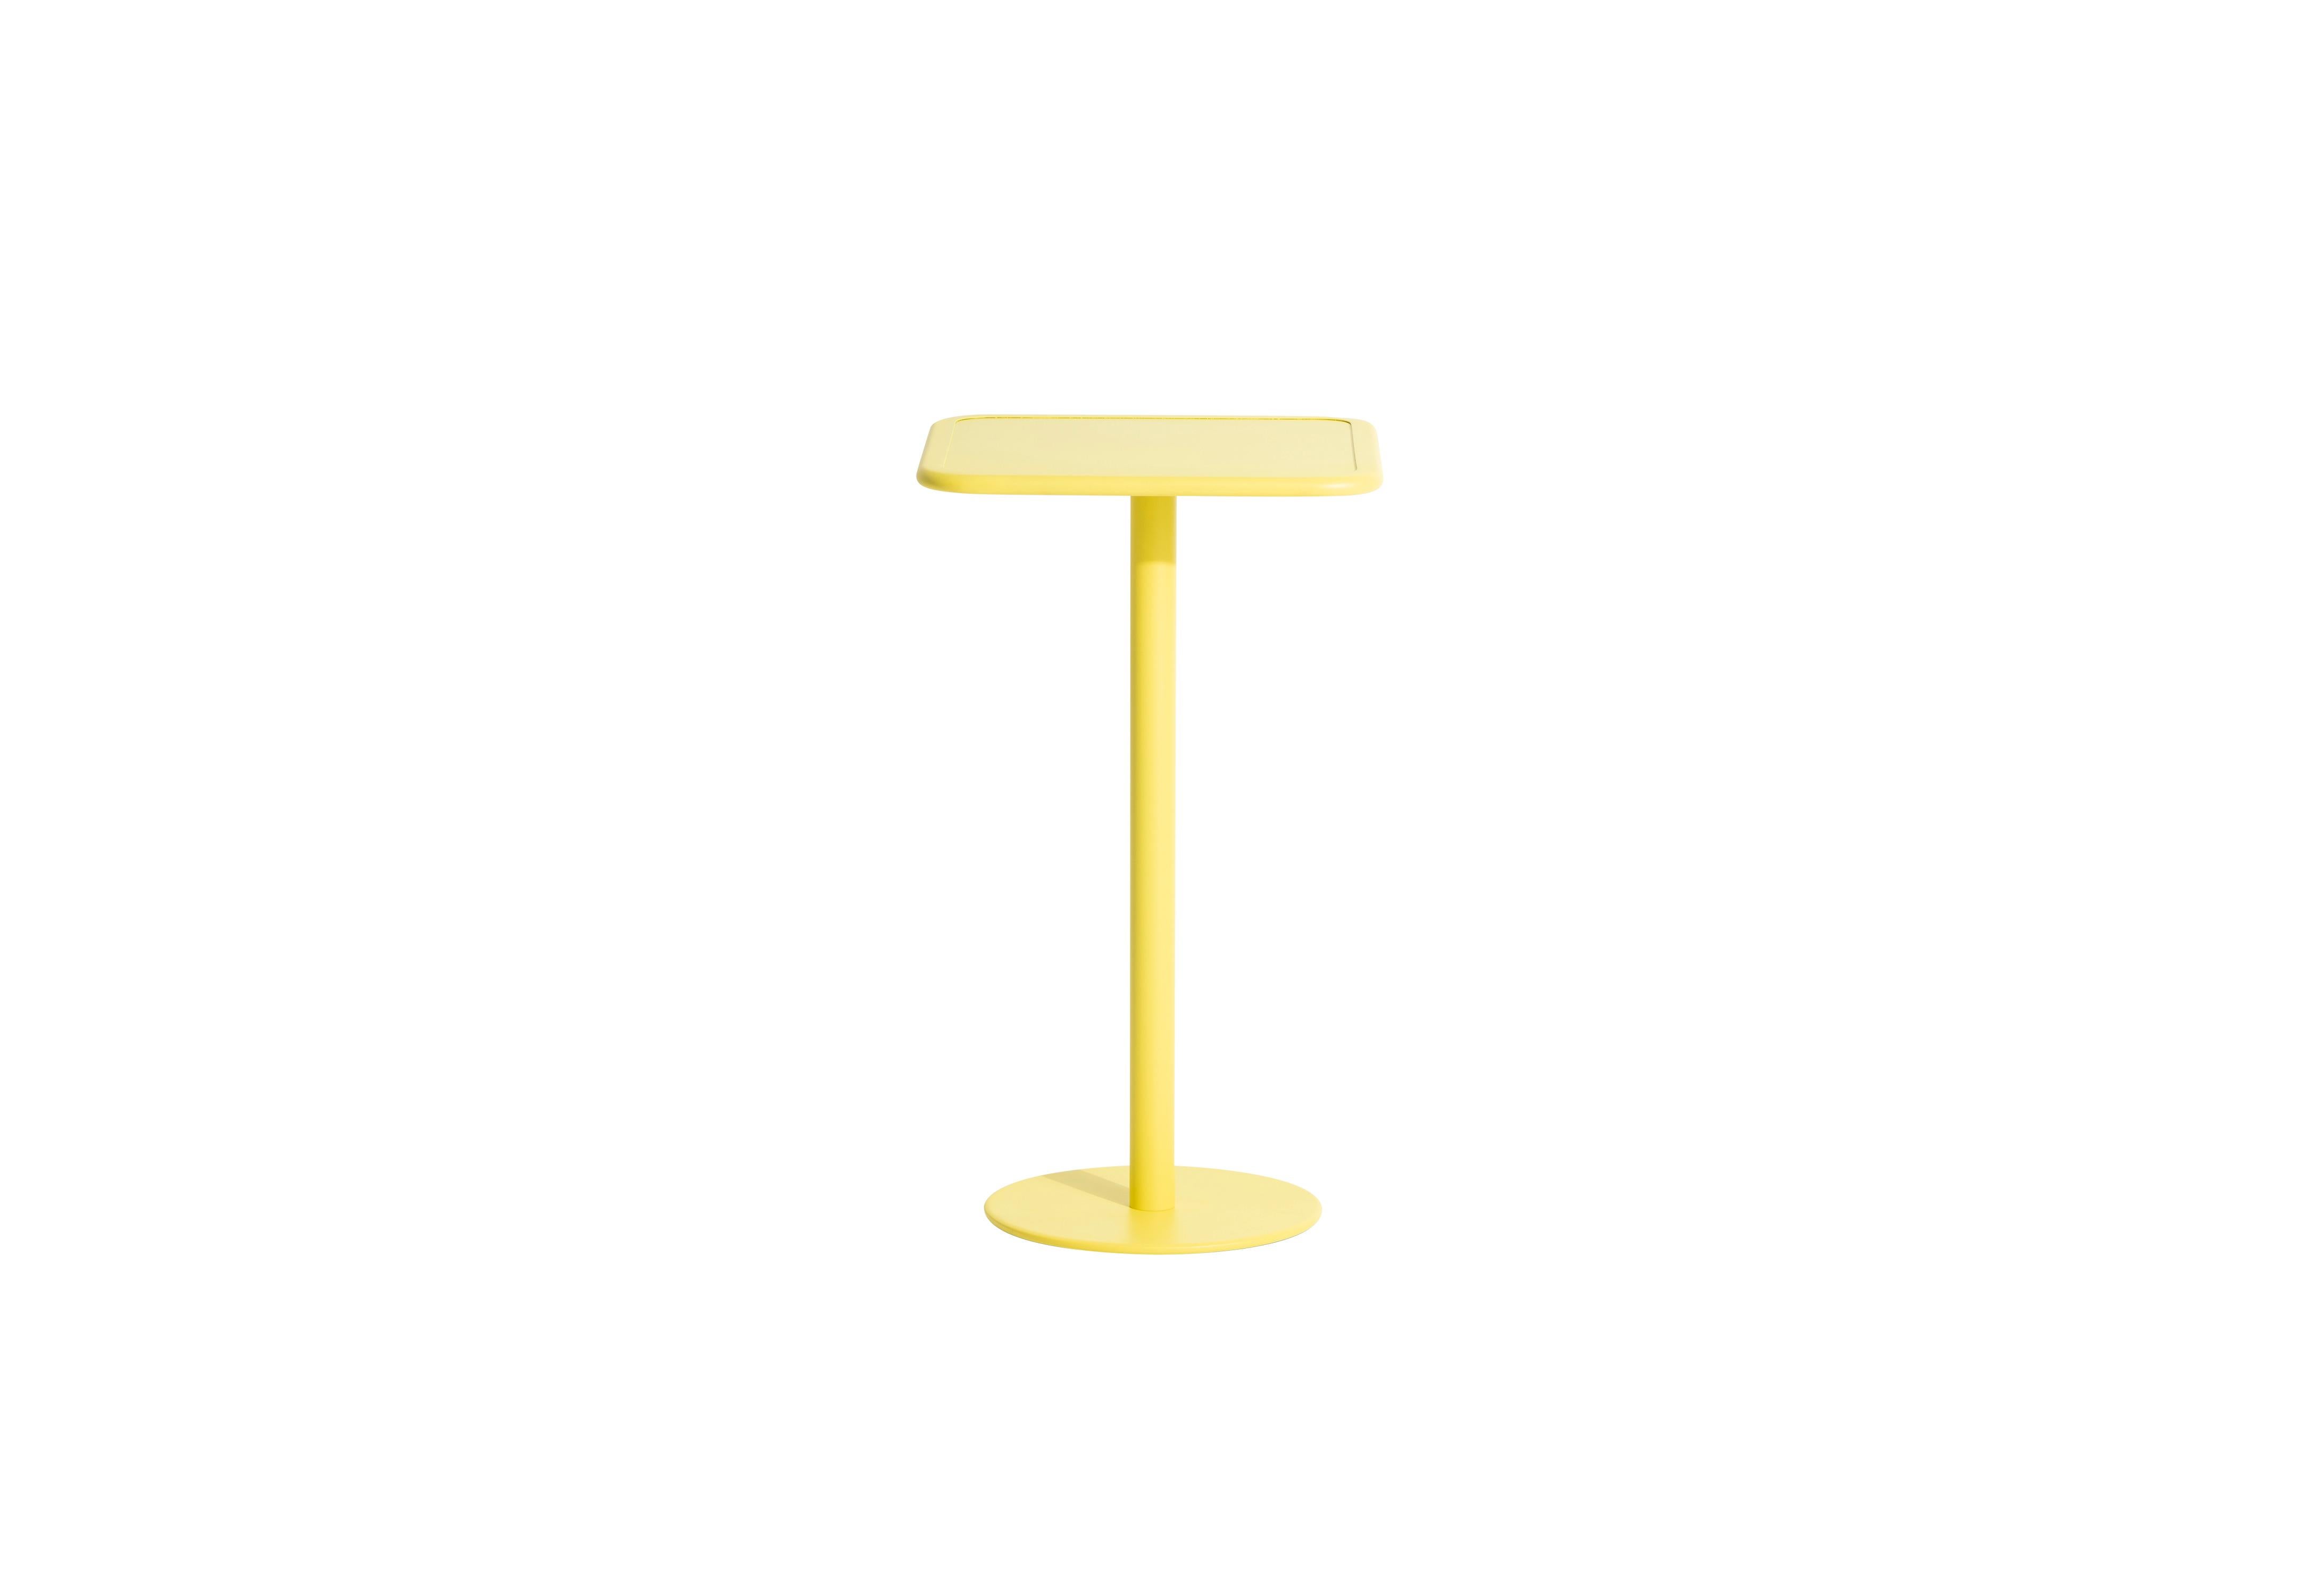 Petite Friture Week-End Square High Table in Yellow Aluminium by Studio BrichetZiegler, 2017

The week-end collection is a full range of outdoor furniture, in aluminium grained epoxy paint, matt finish, that includes 18 functions and 8 colours for